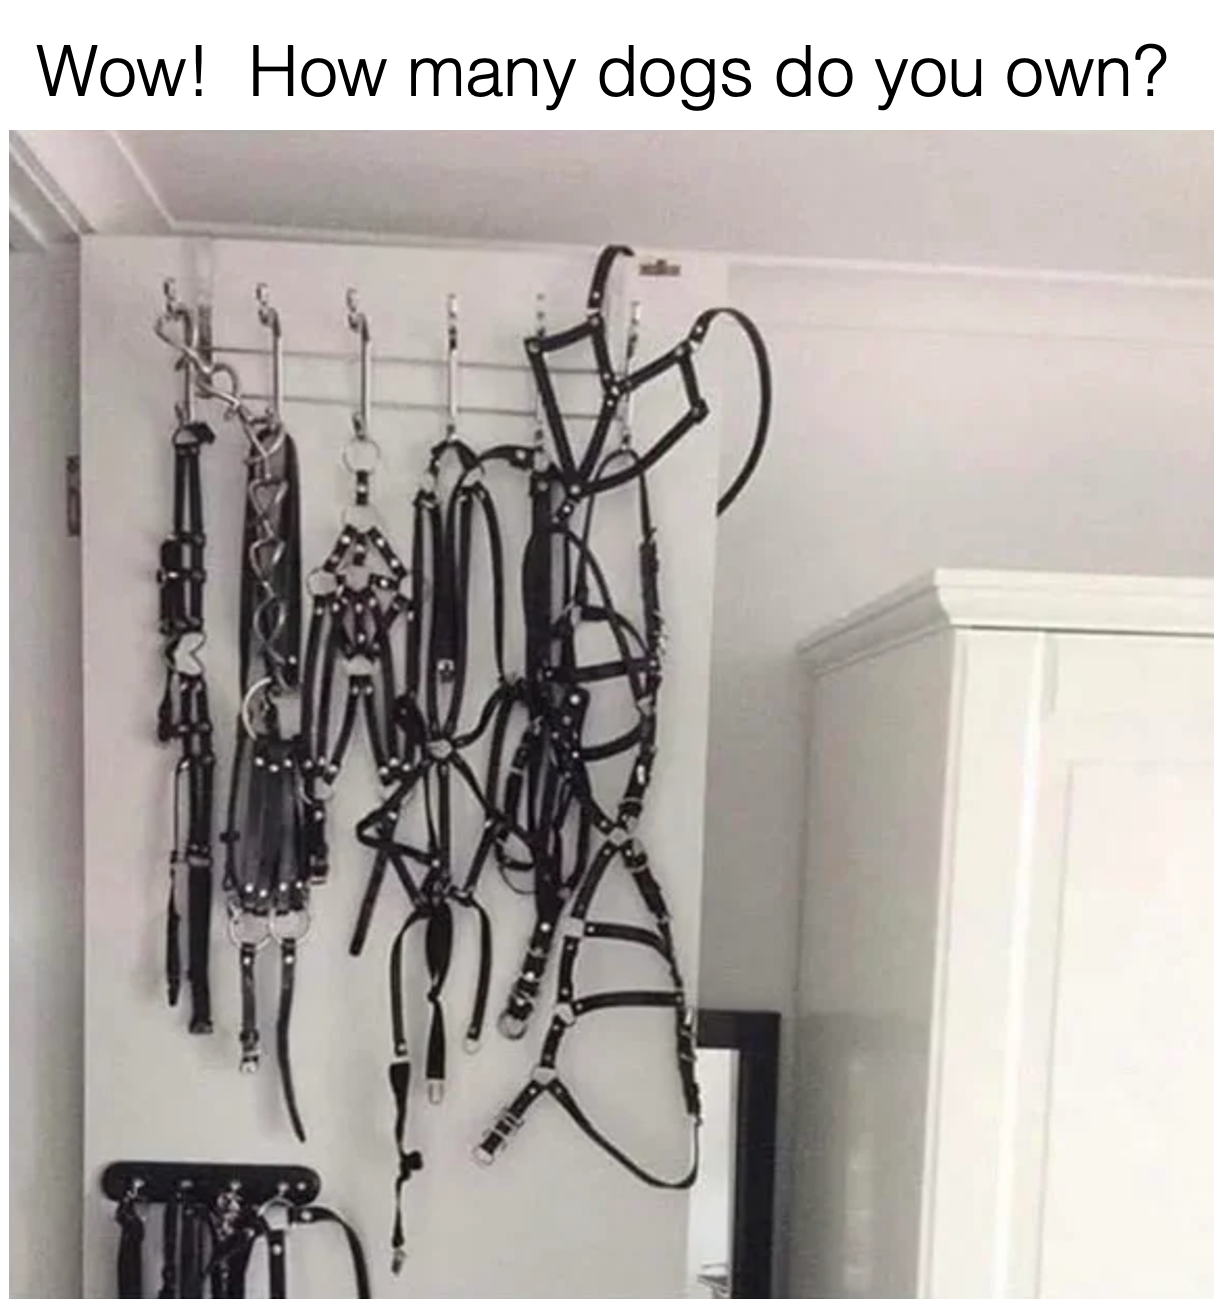 11. Thats a whole lotta dogs!